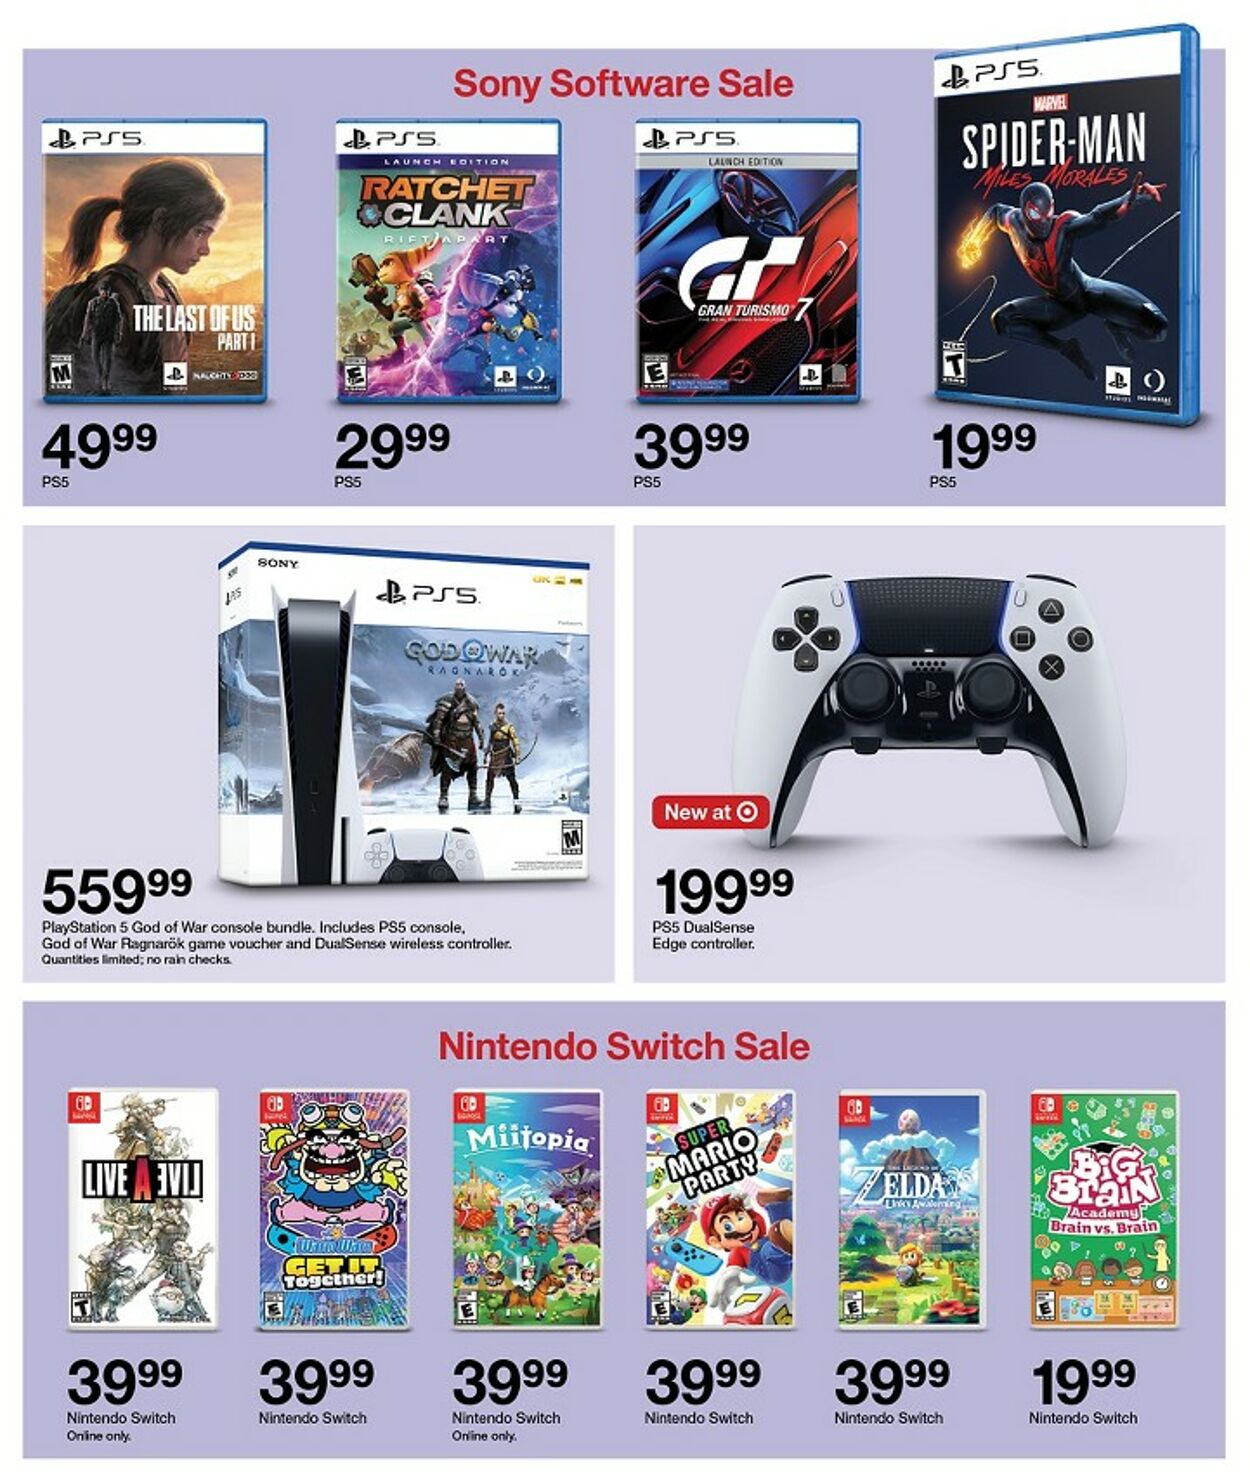 Target Ad from 02/26/2023